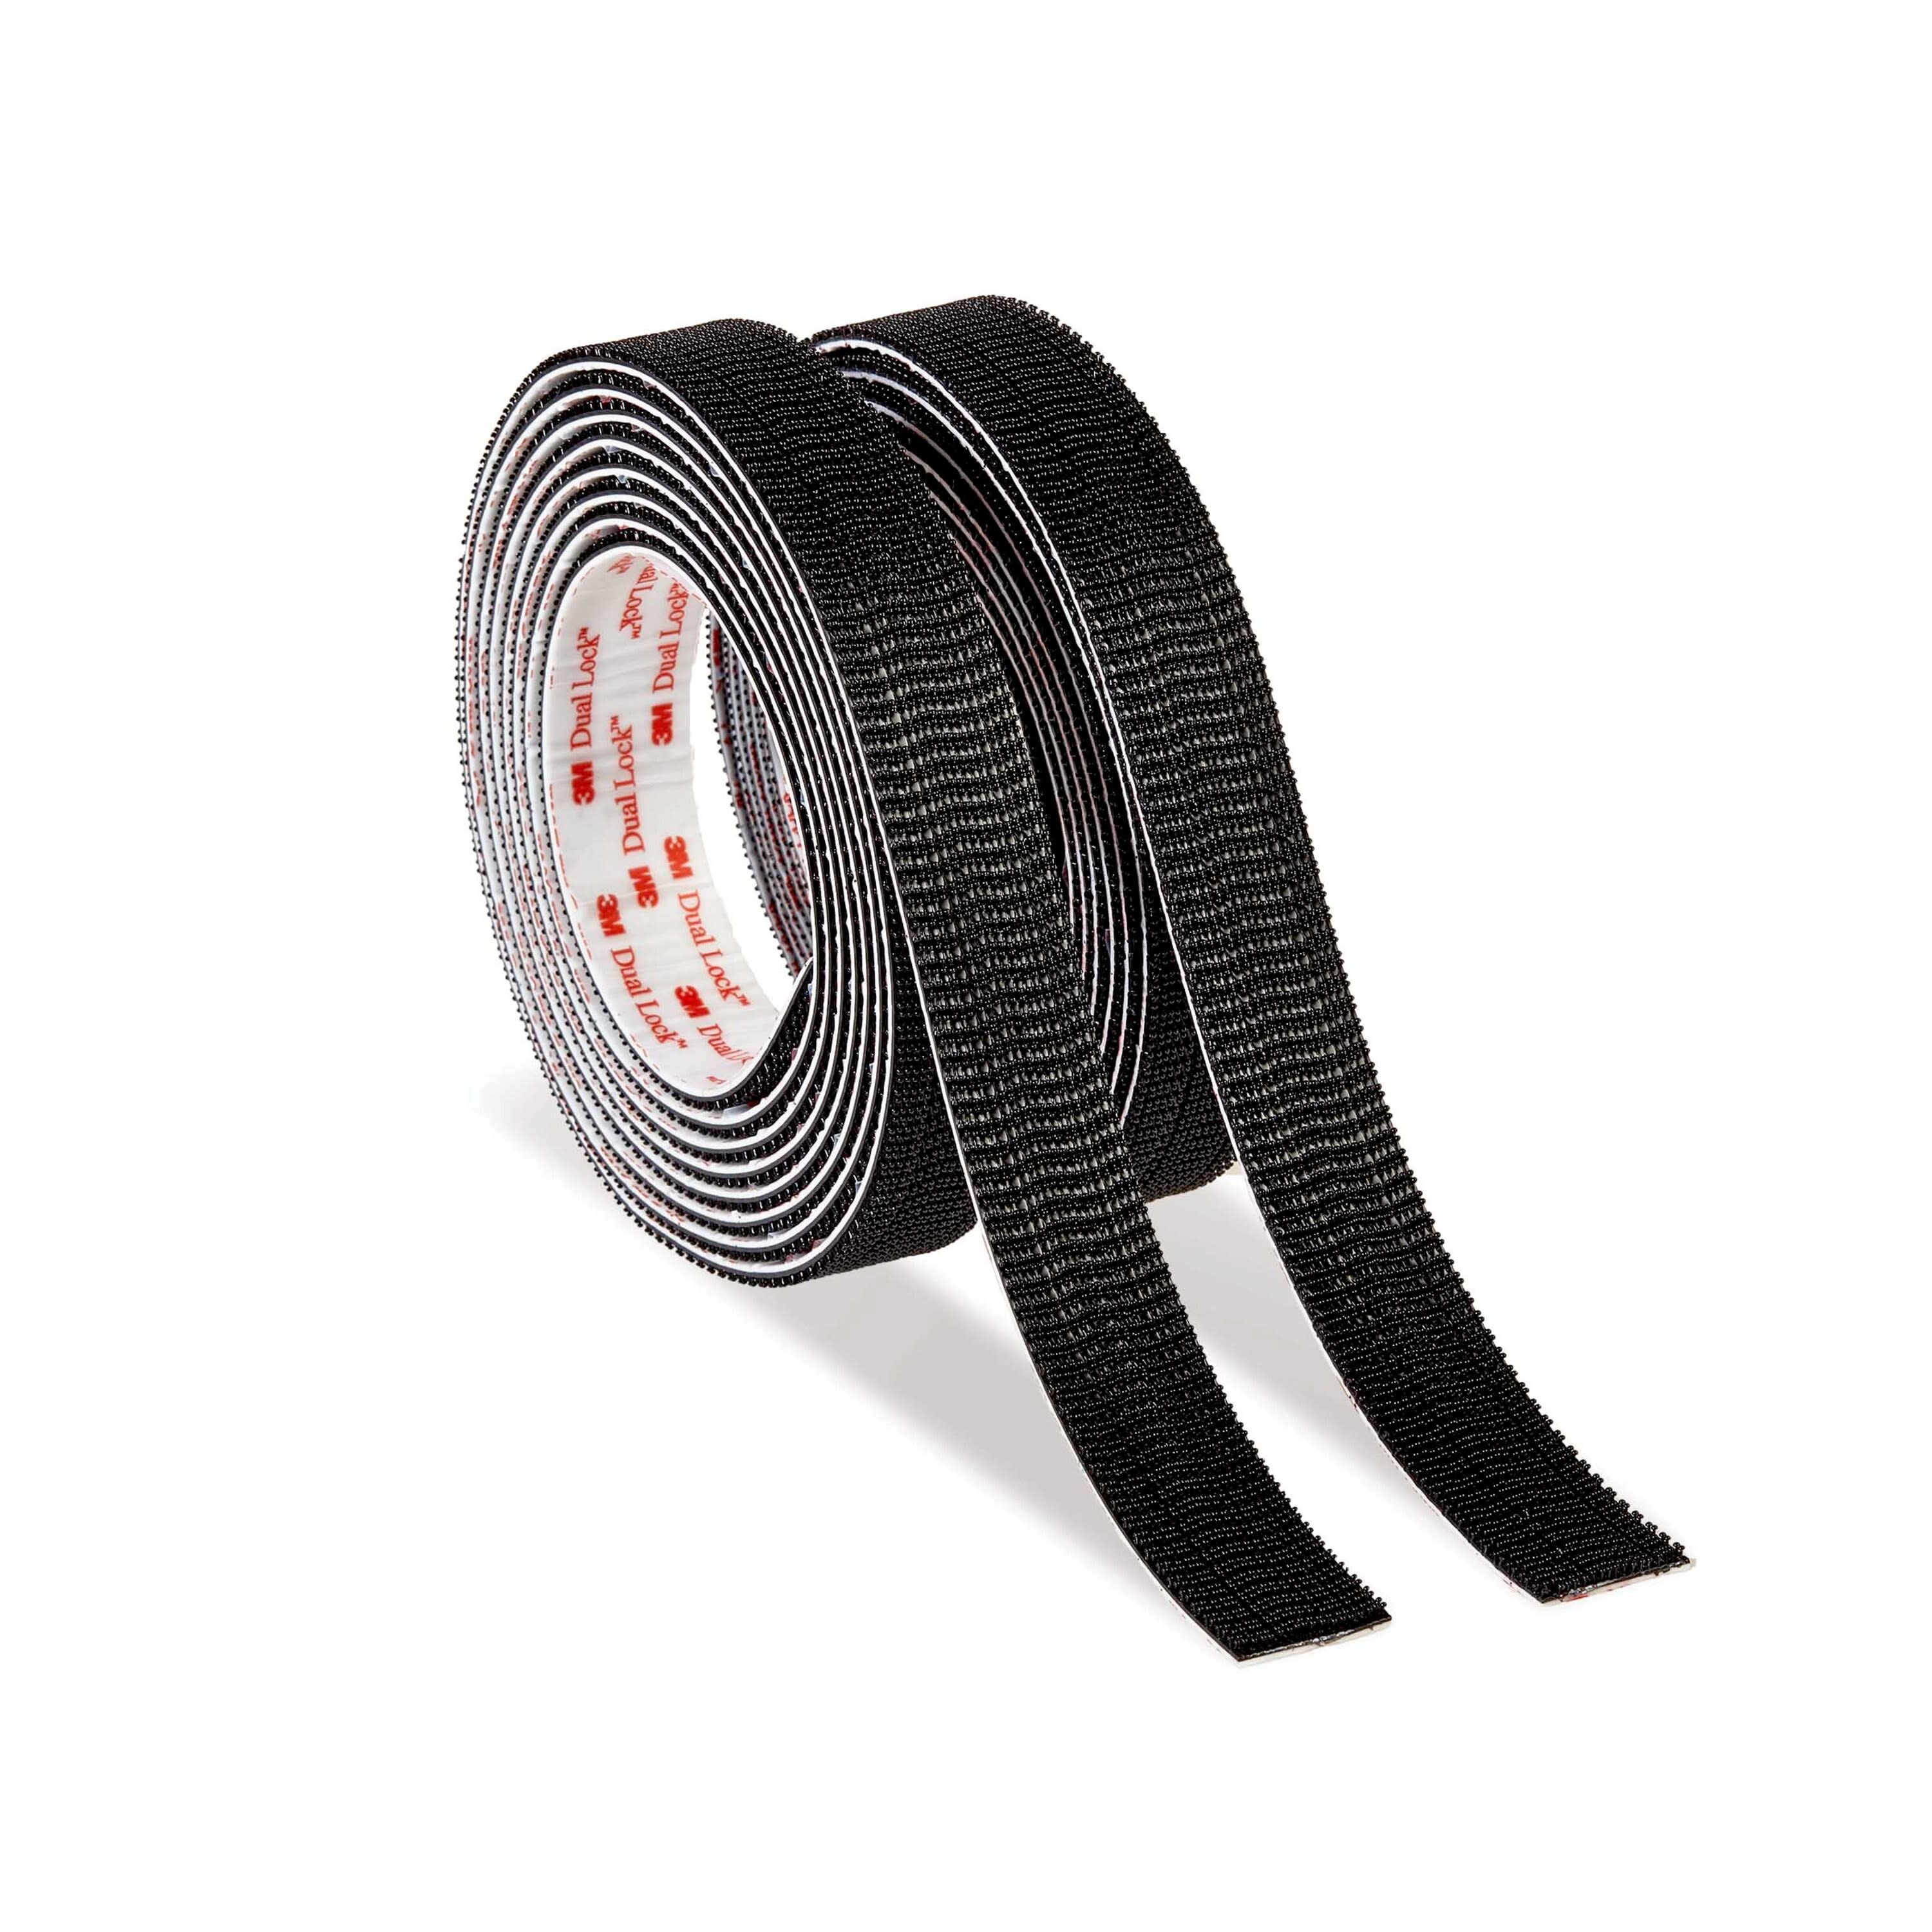 FASTENation is your #1 Source for VELCRO rolls, 3M, & Dual Lock